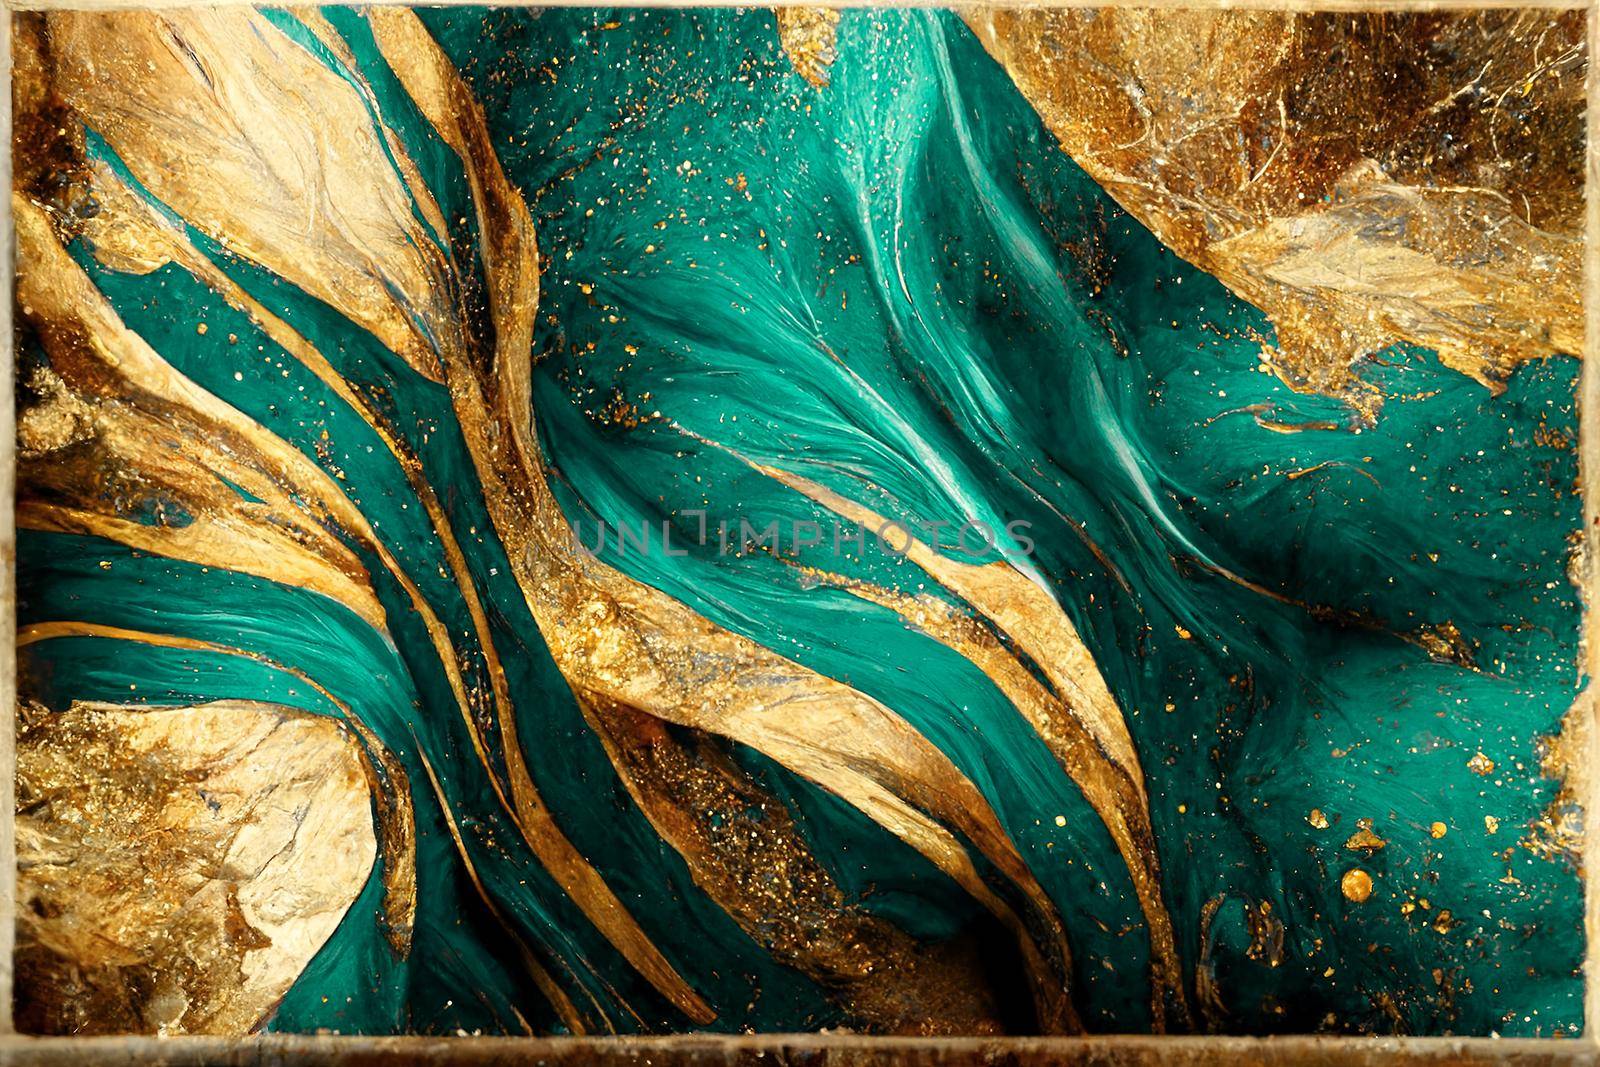 Spectacular dark teal and gold ink swirled around. Digital art 3D illustration. by biancoblue